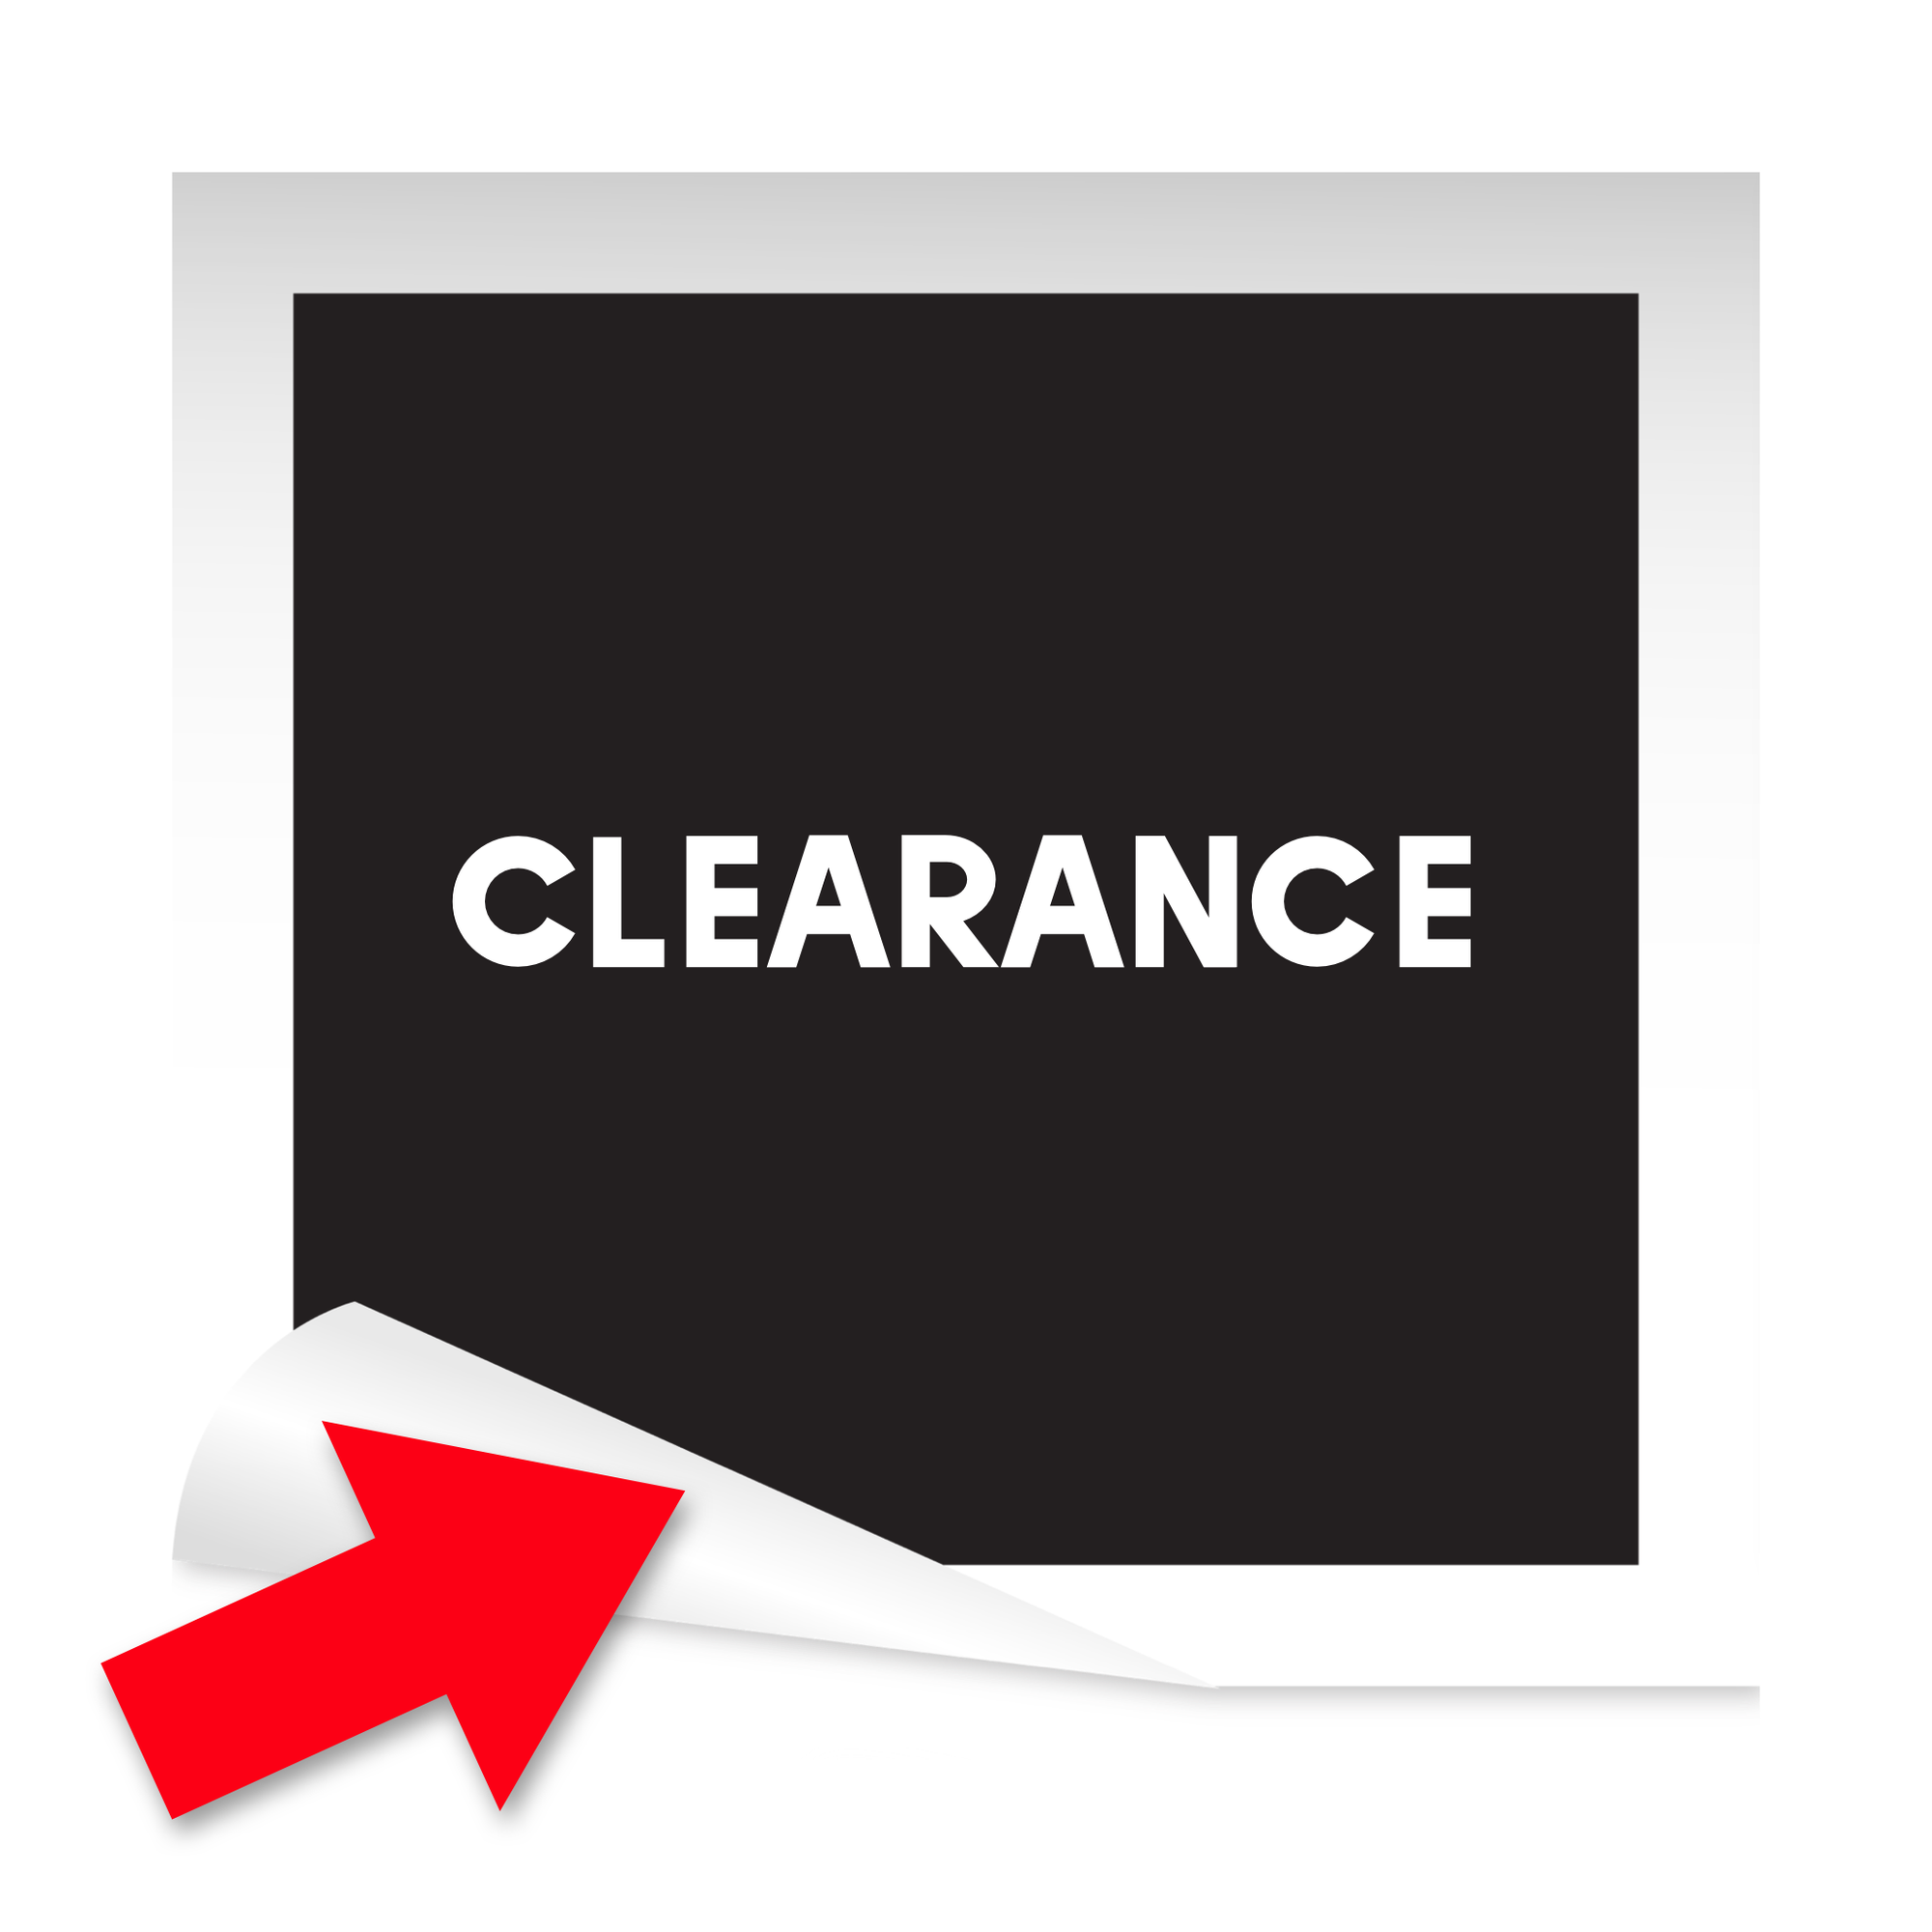 Clearance while stocks last